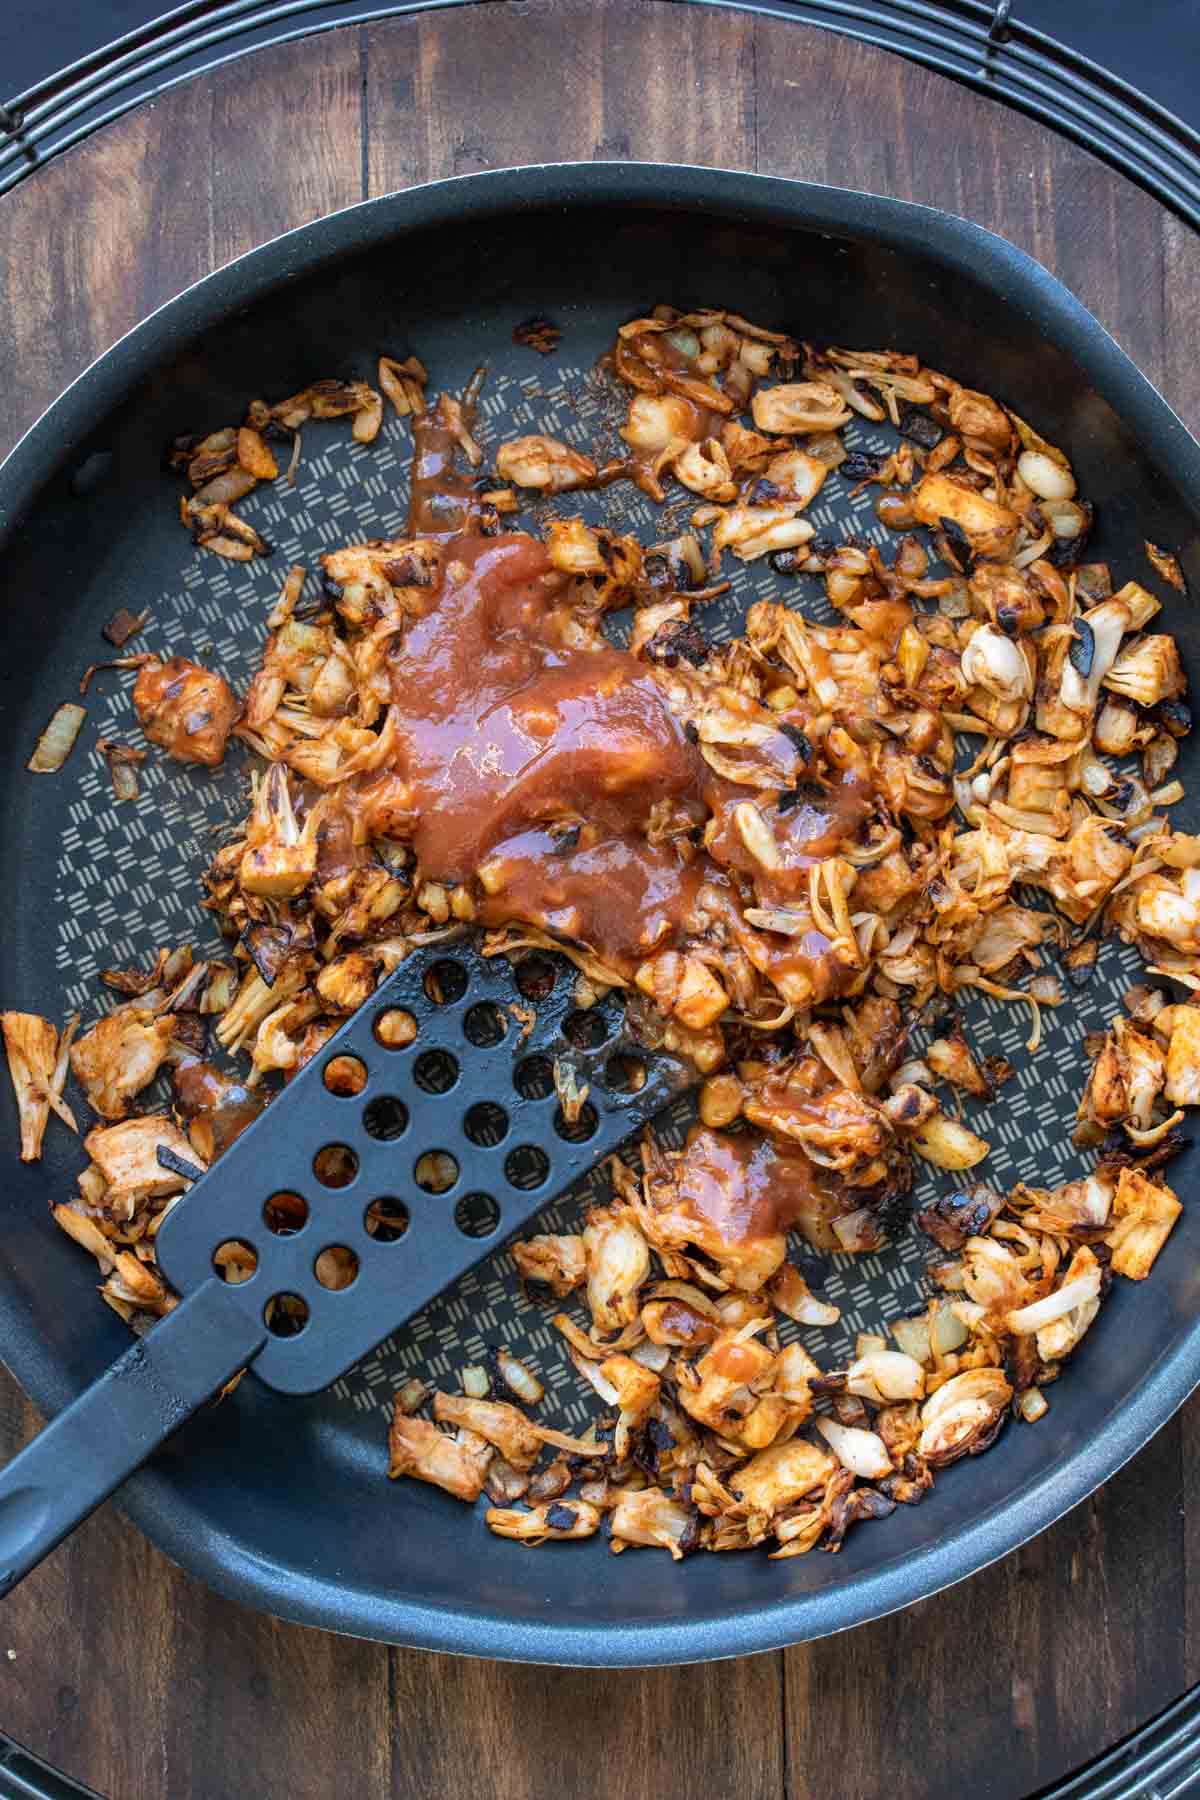 Spatula mixing BBQ sauce over pieces of browned jackfruit in a pan